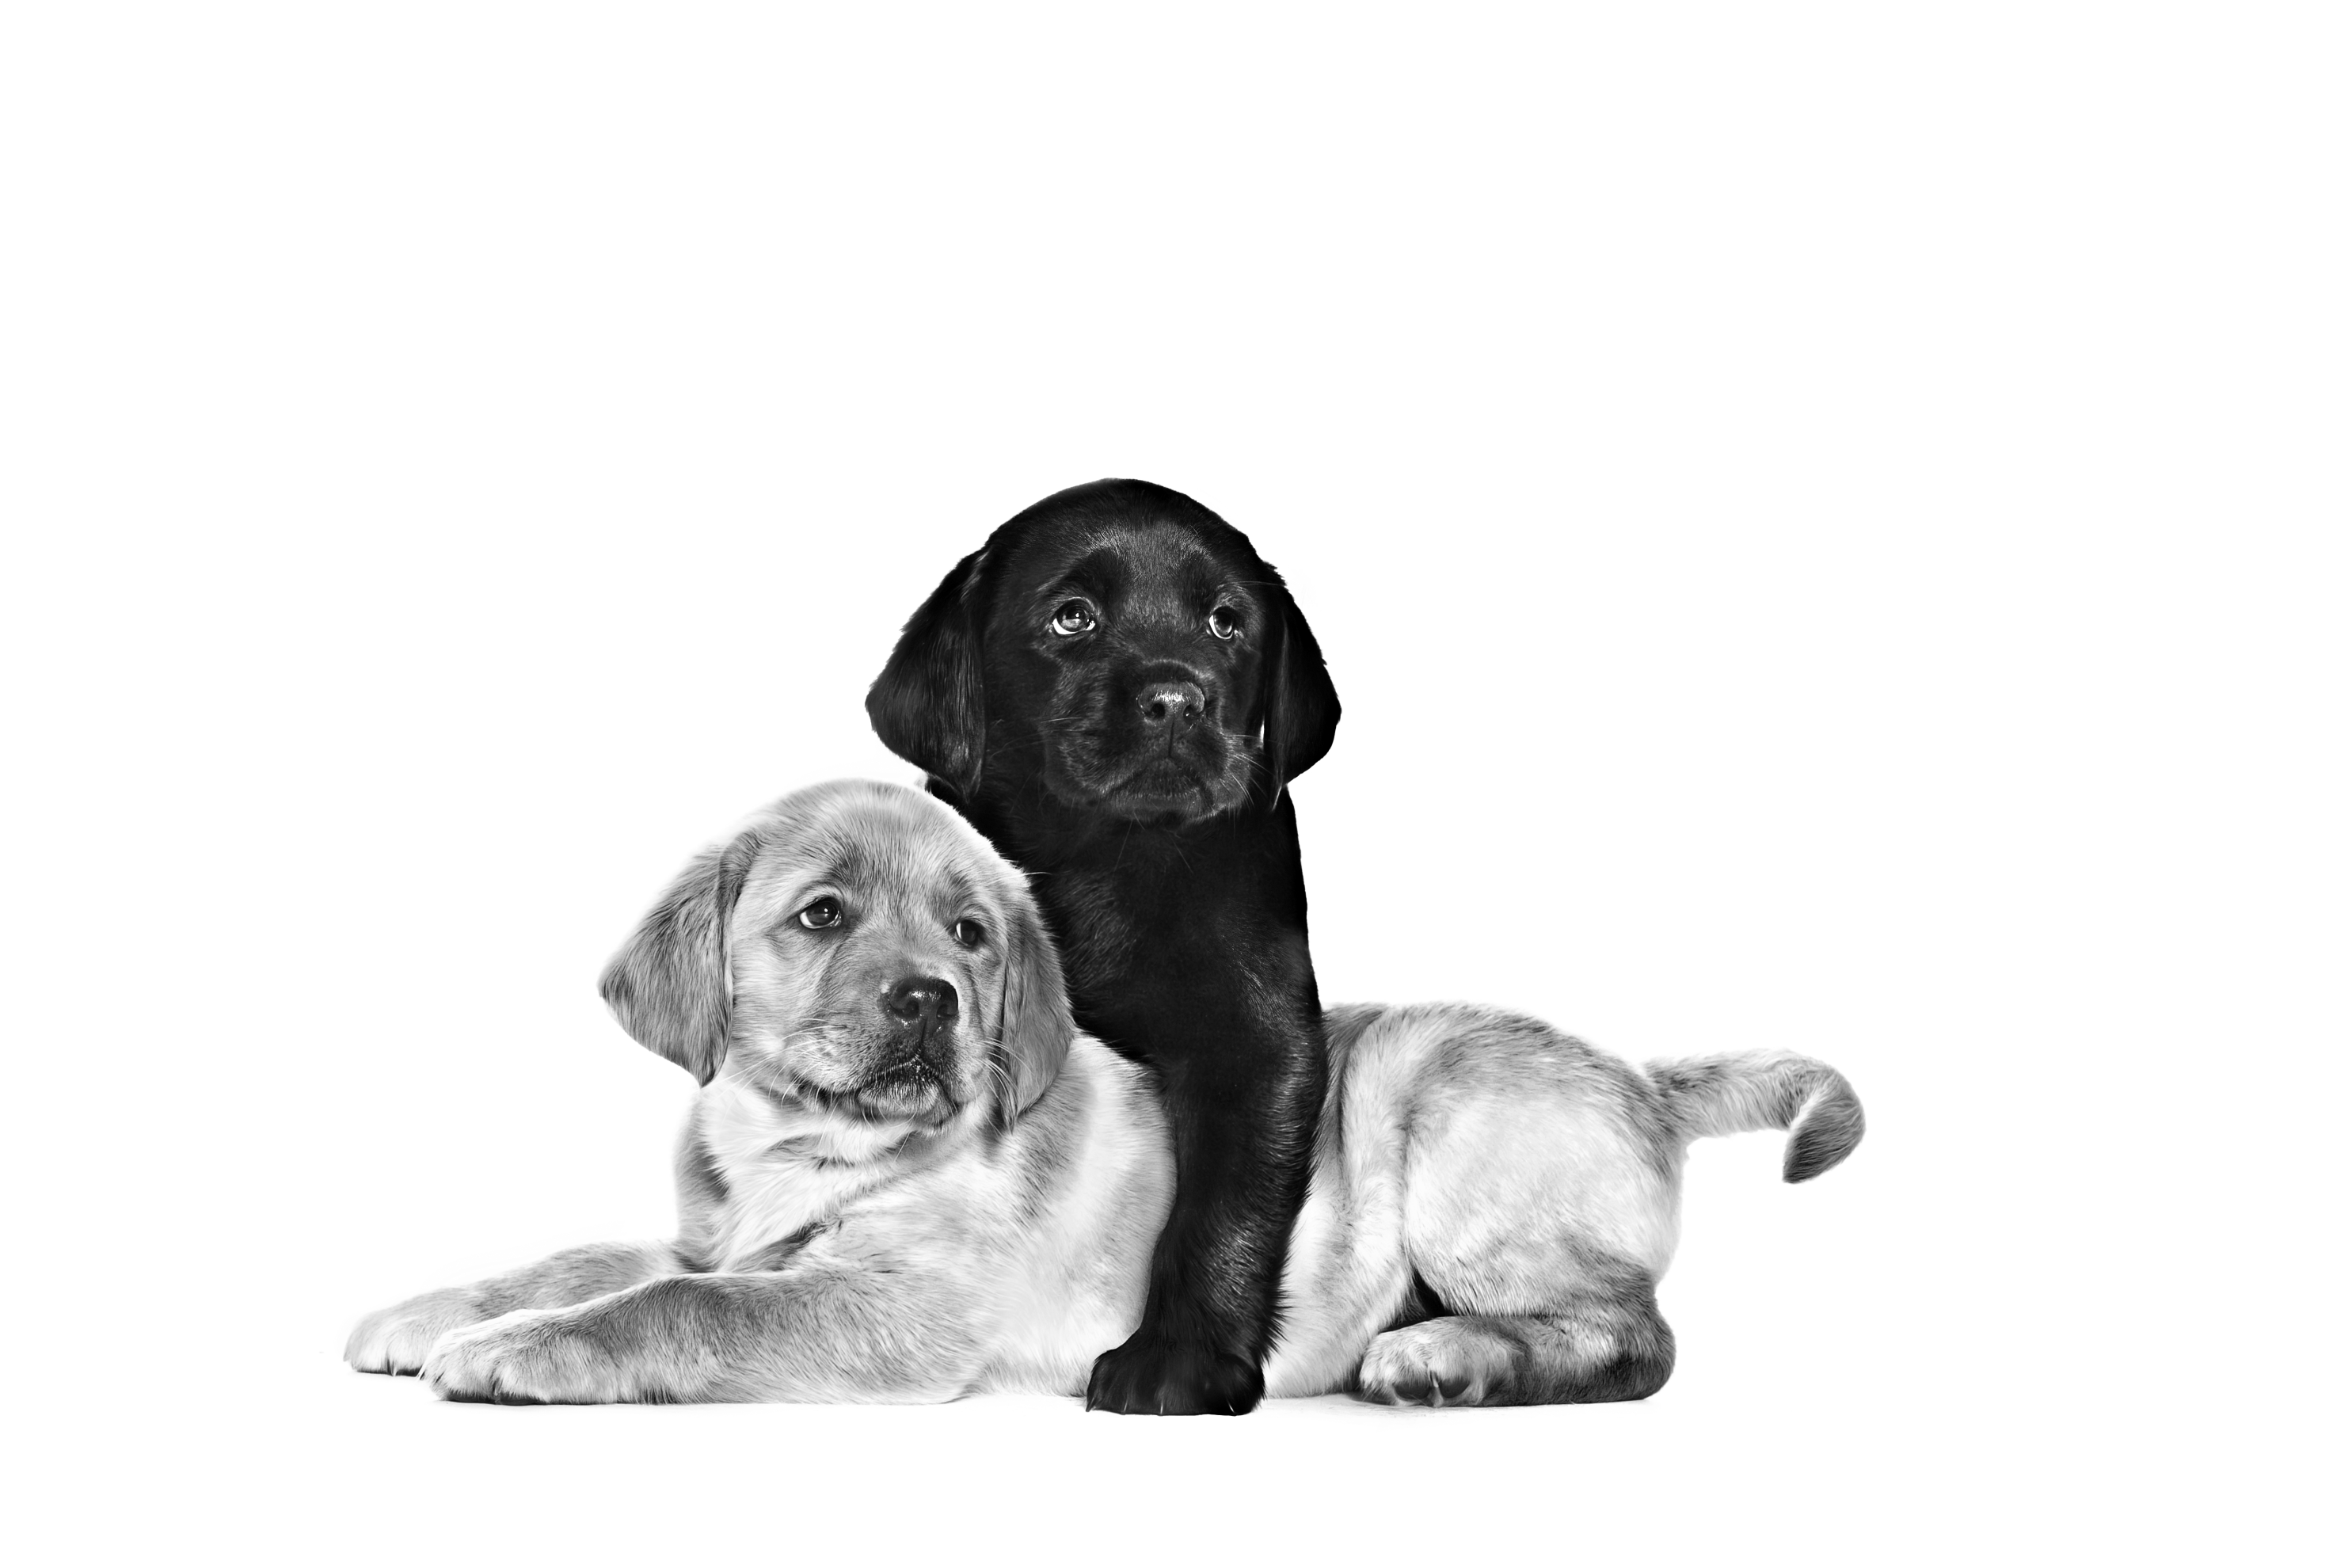 Black and golden Labrador Retriever puppies lying down together in black and white on a white background